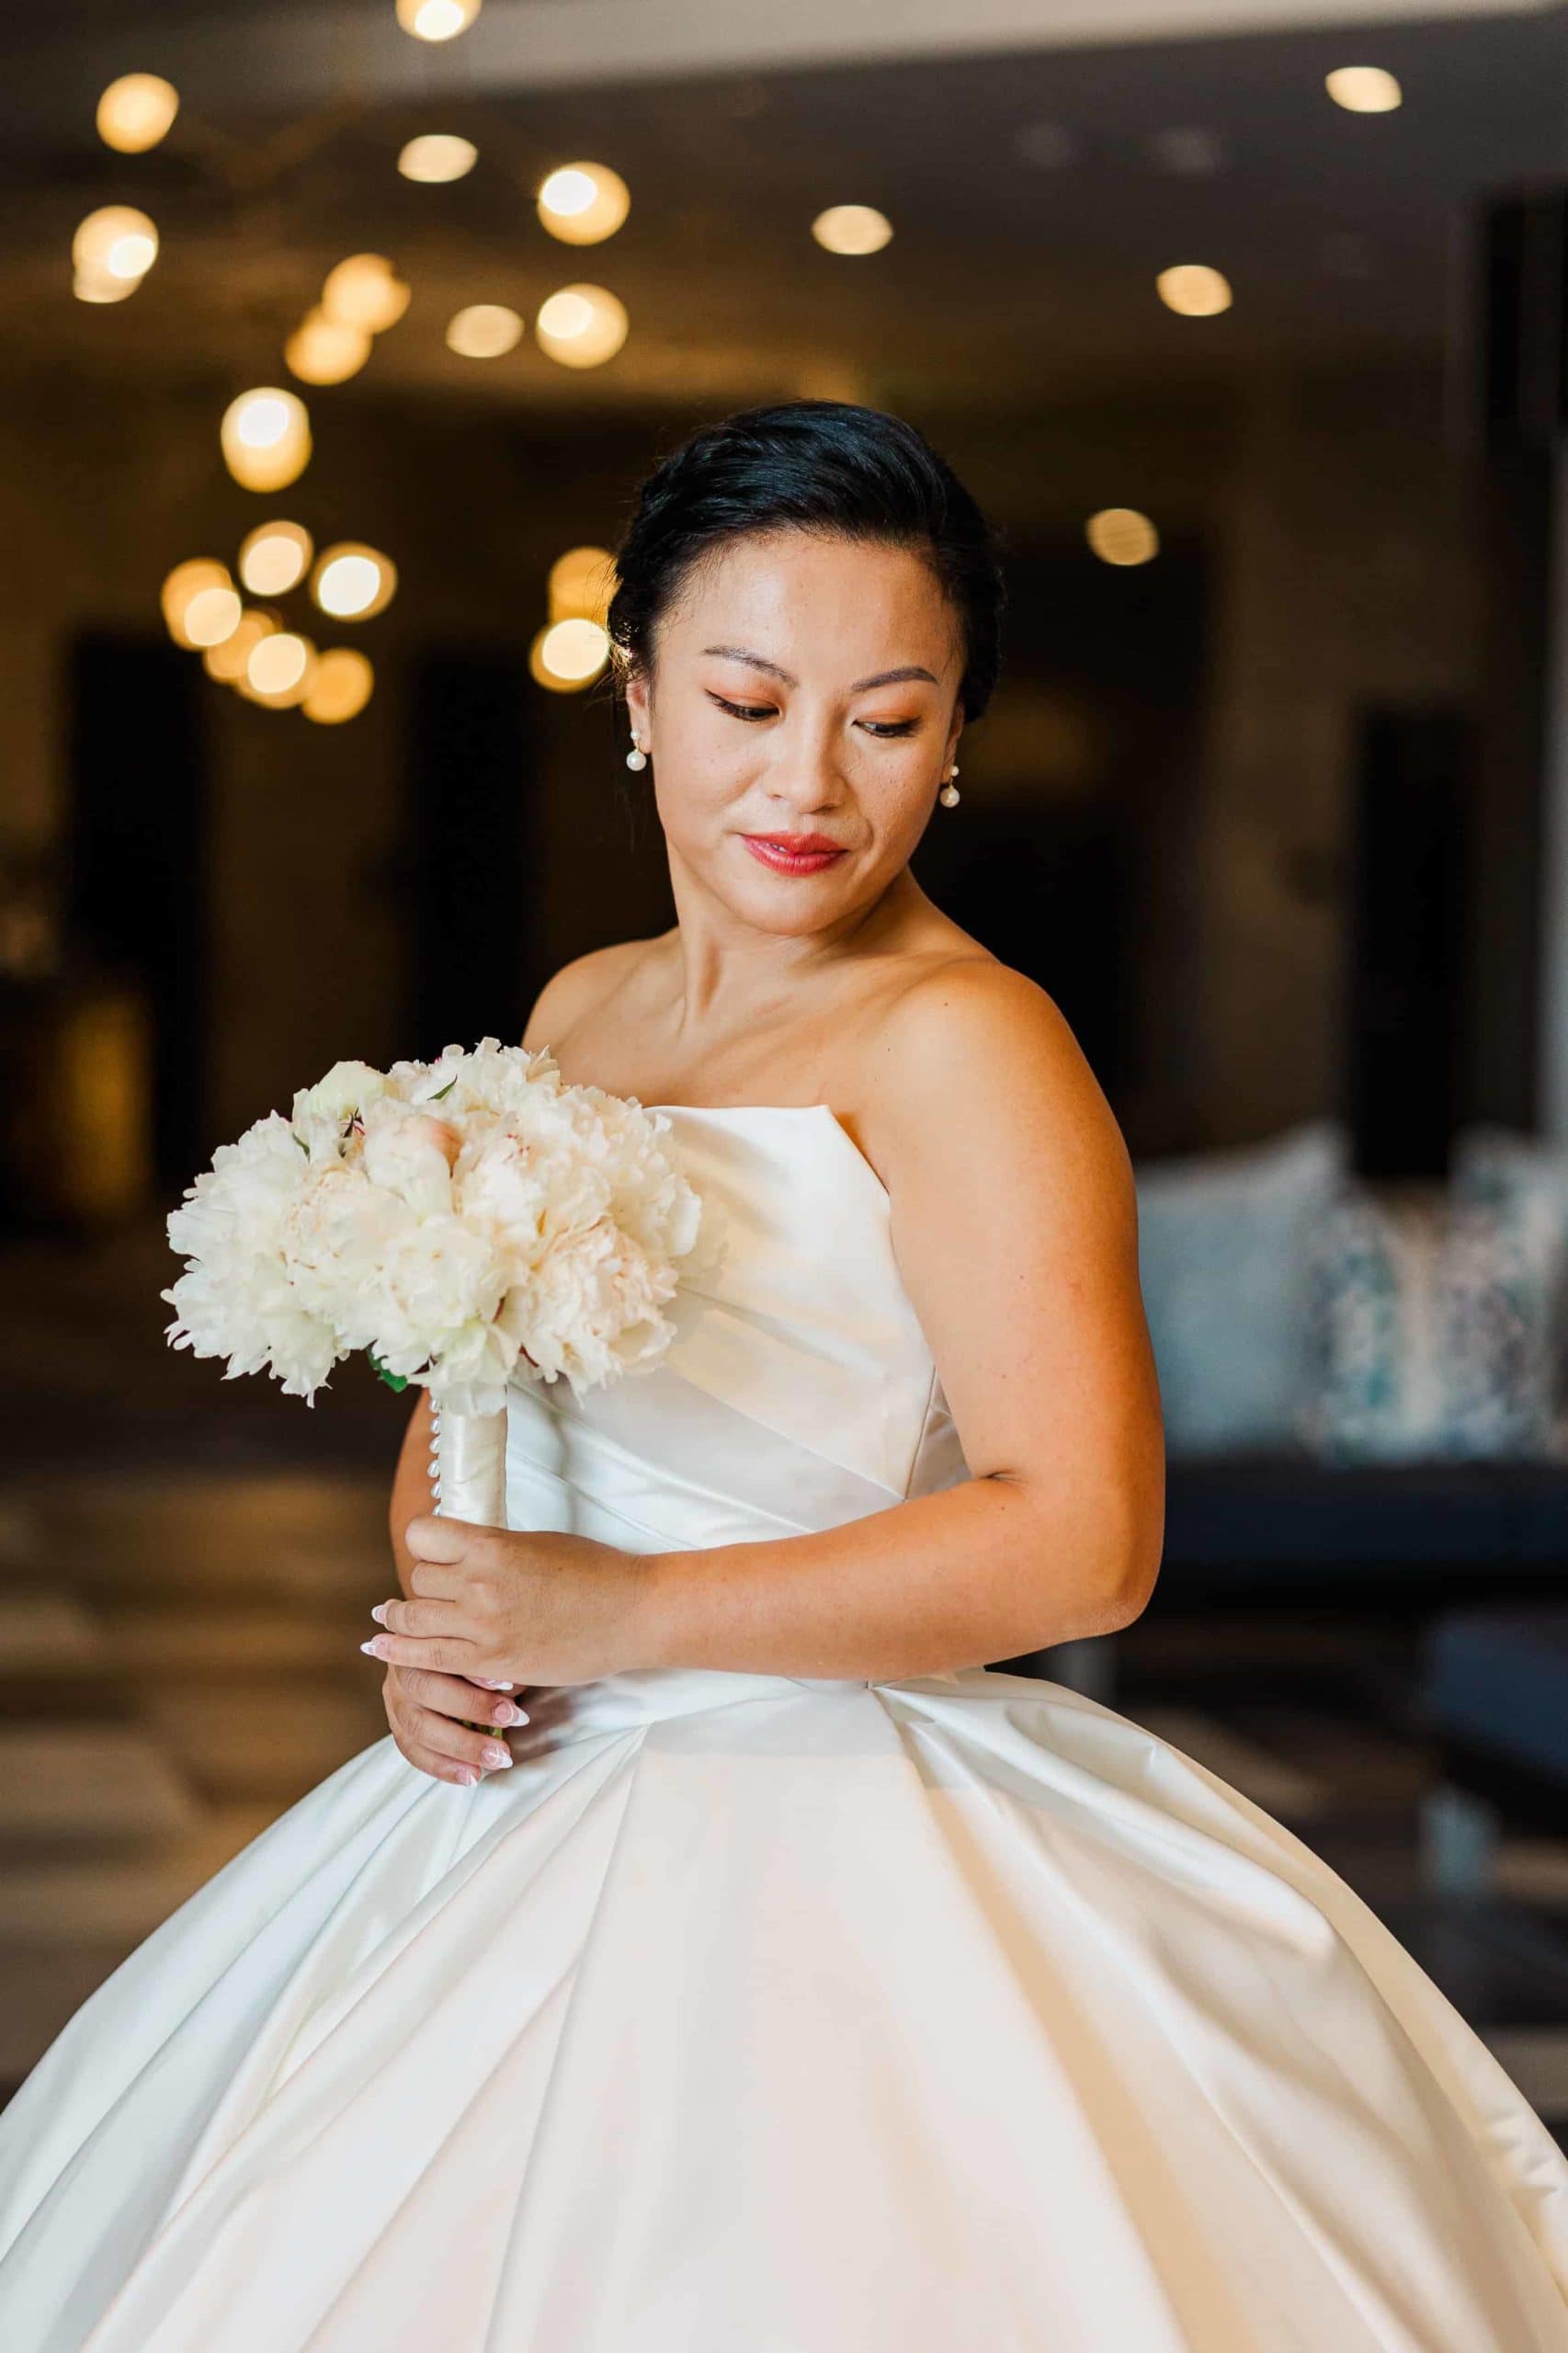 Asian, American woman holding a wedding bouquet looking down at the floor wearing a white dress